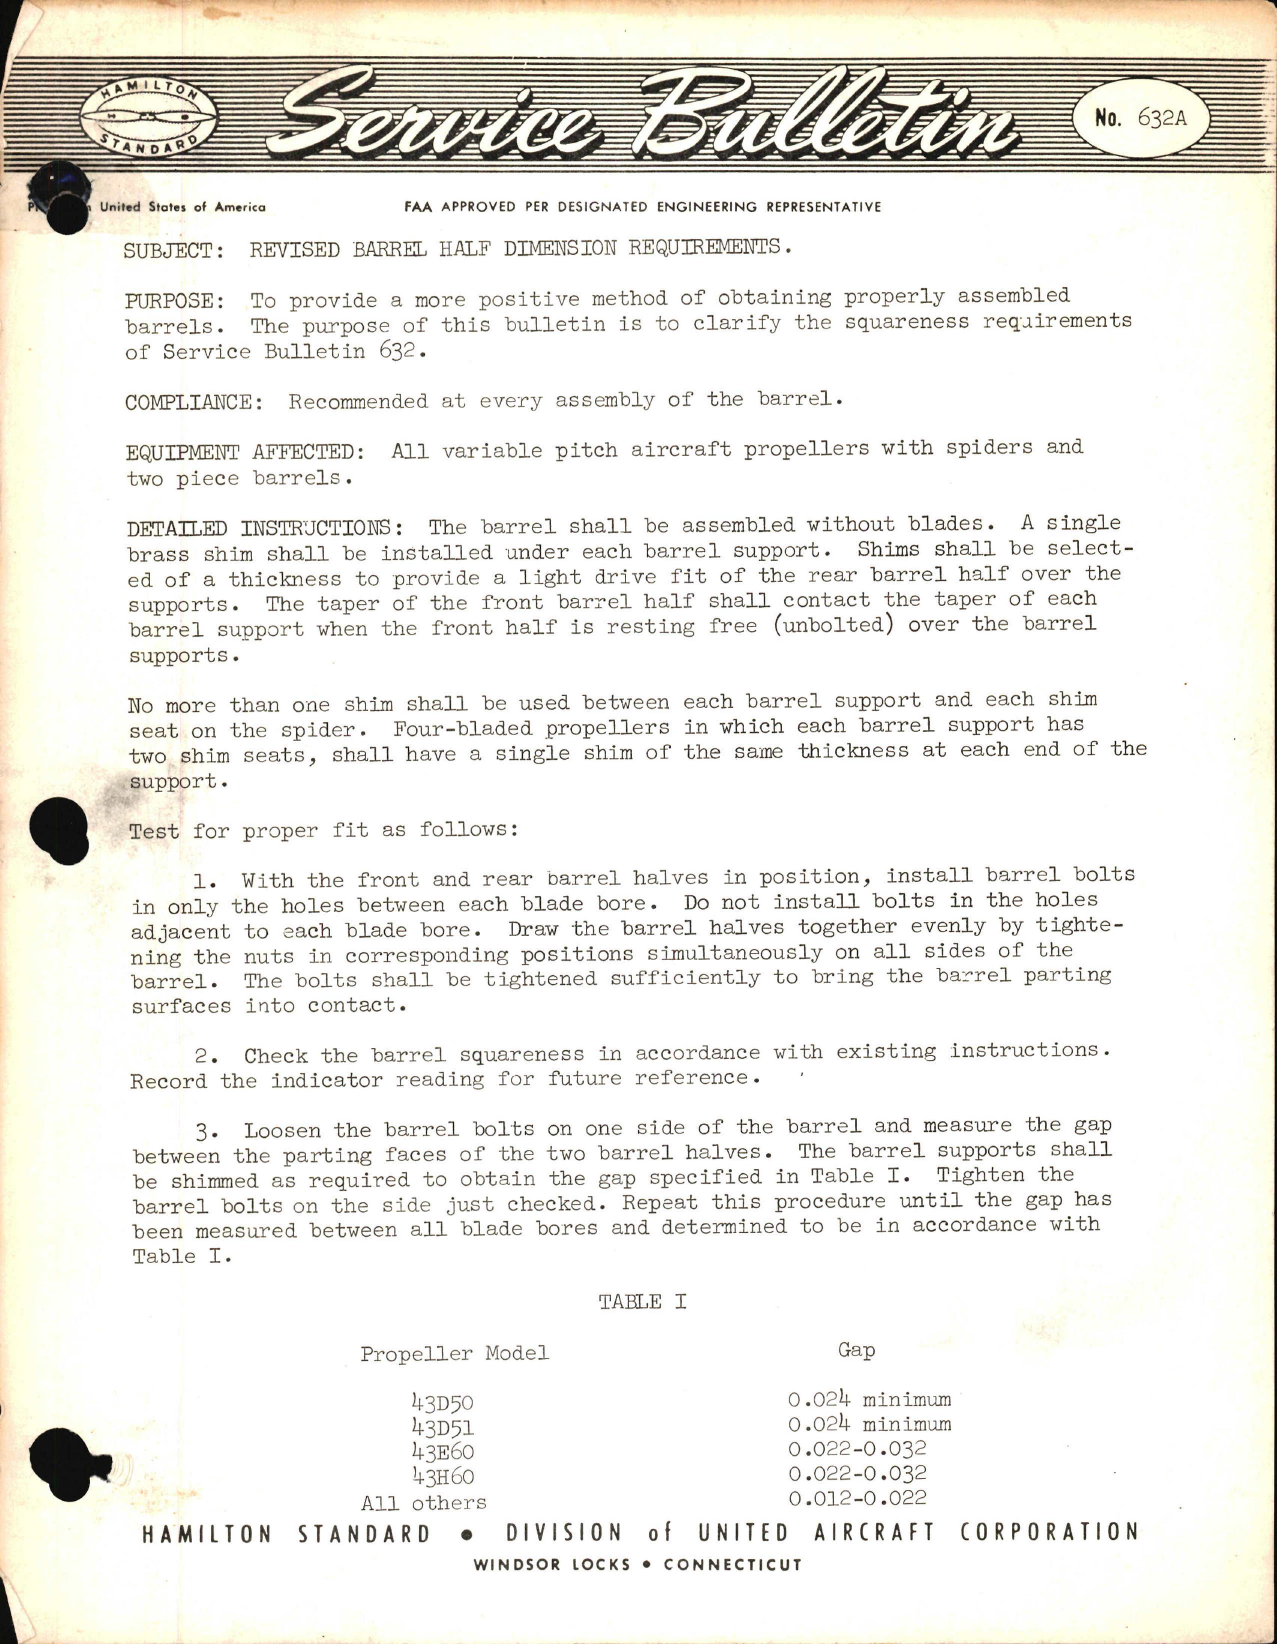 Sample page 1 from AirCorps Library document: Revised Barrel Half Dimension Requirements